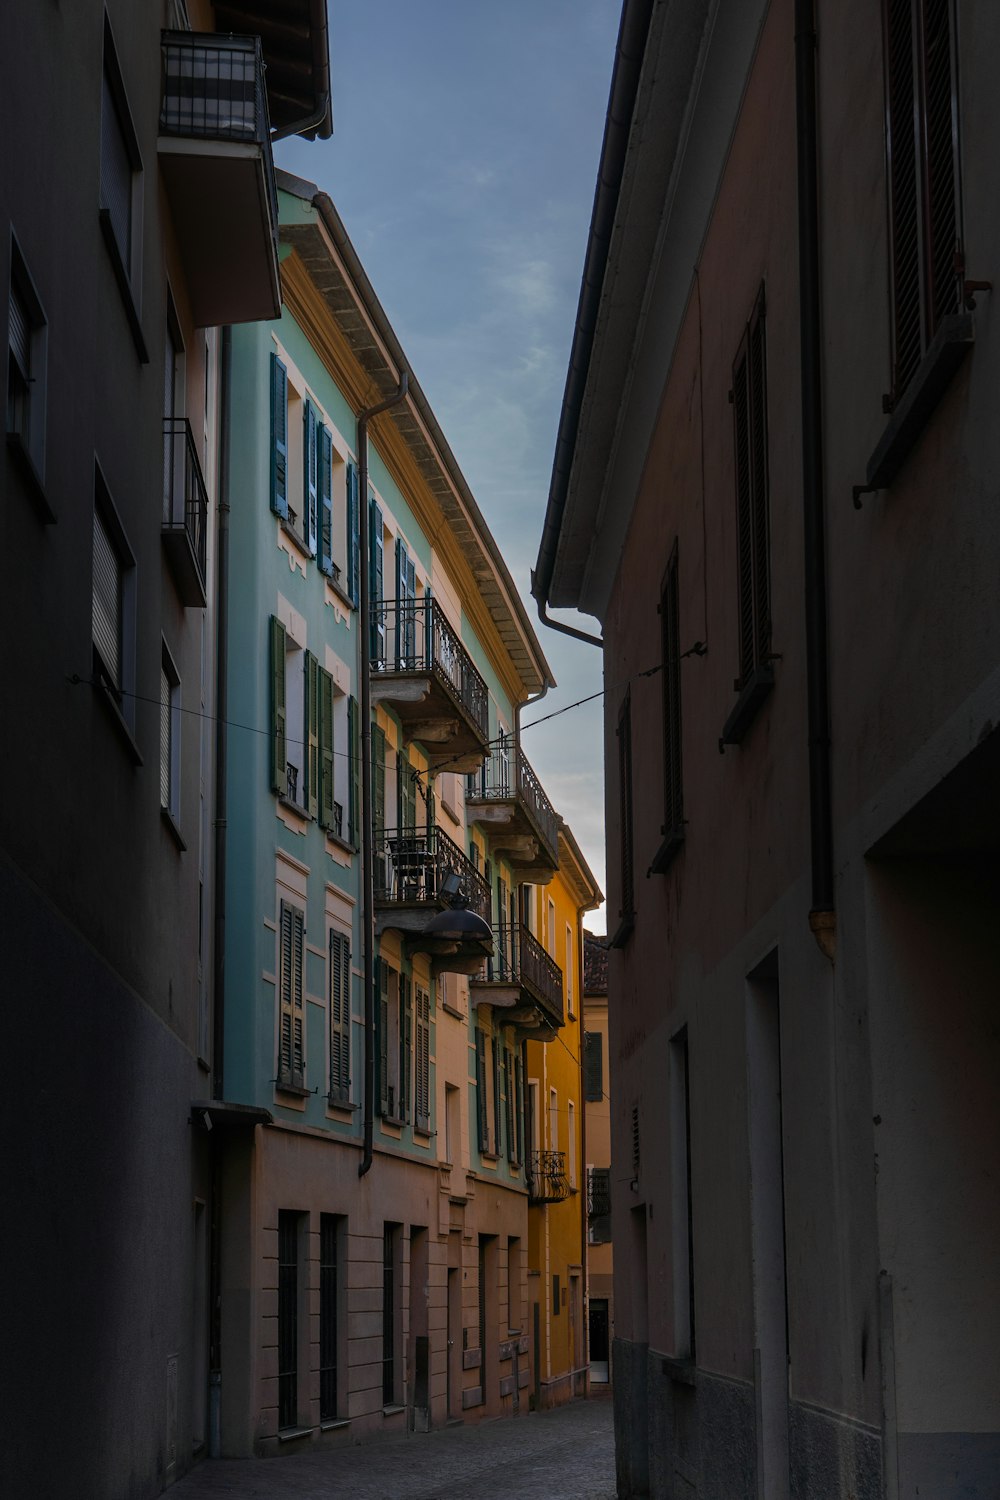 a narrow alley way with buildings and balconies